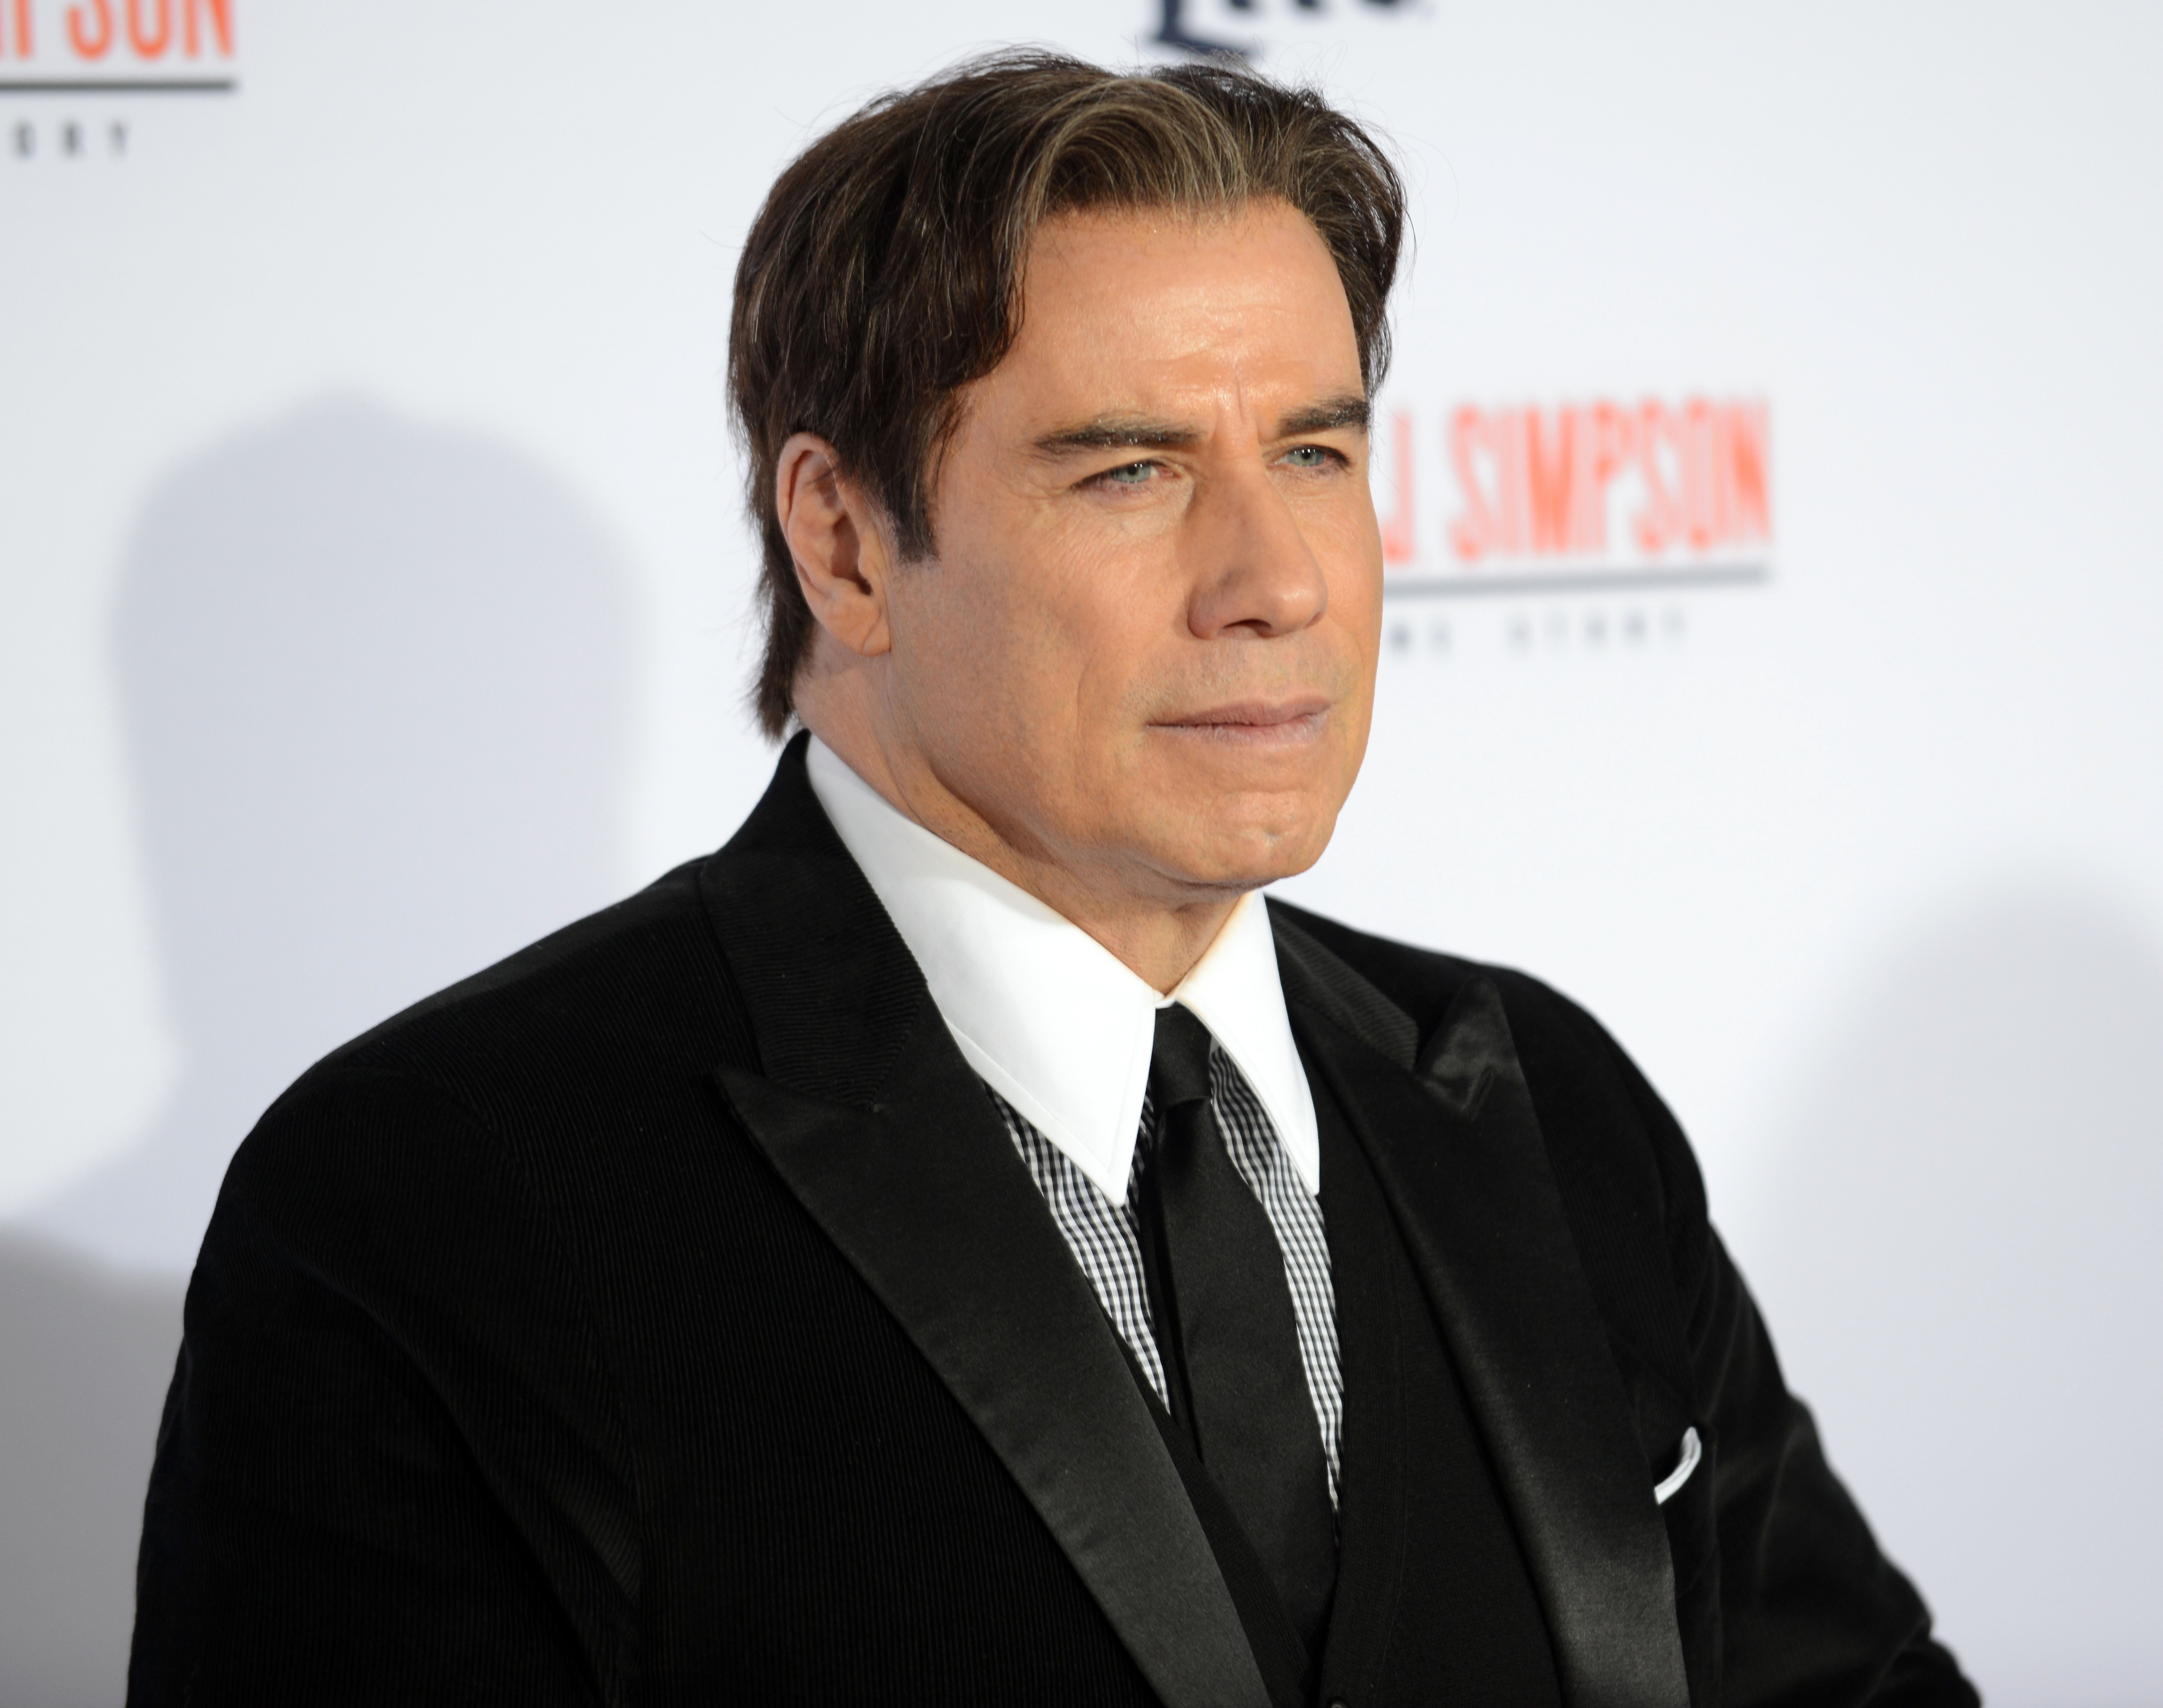  John Travolta at the premiere of "FX's "American Crime Story - The People V. O.J. Simpson" held at Westwood Village Theatre on January 27, 2016 in Westwood, California | Photo: Getty Images